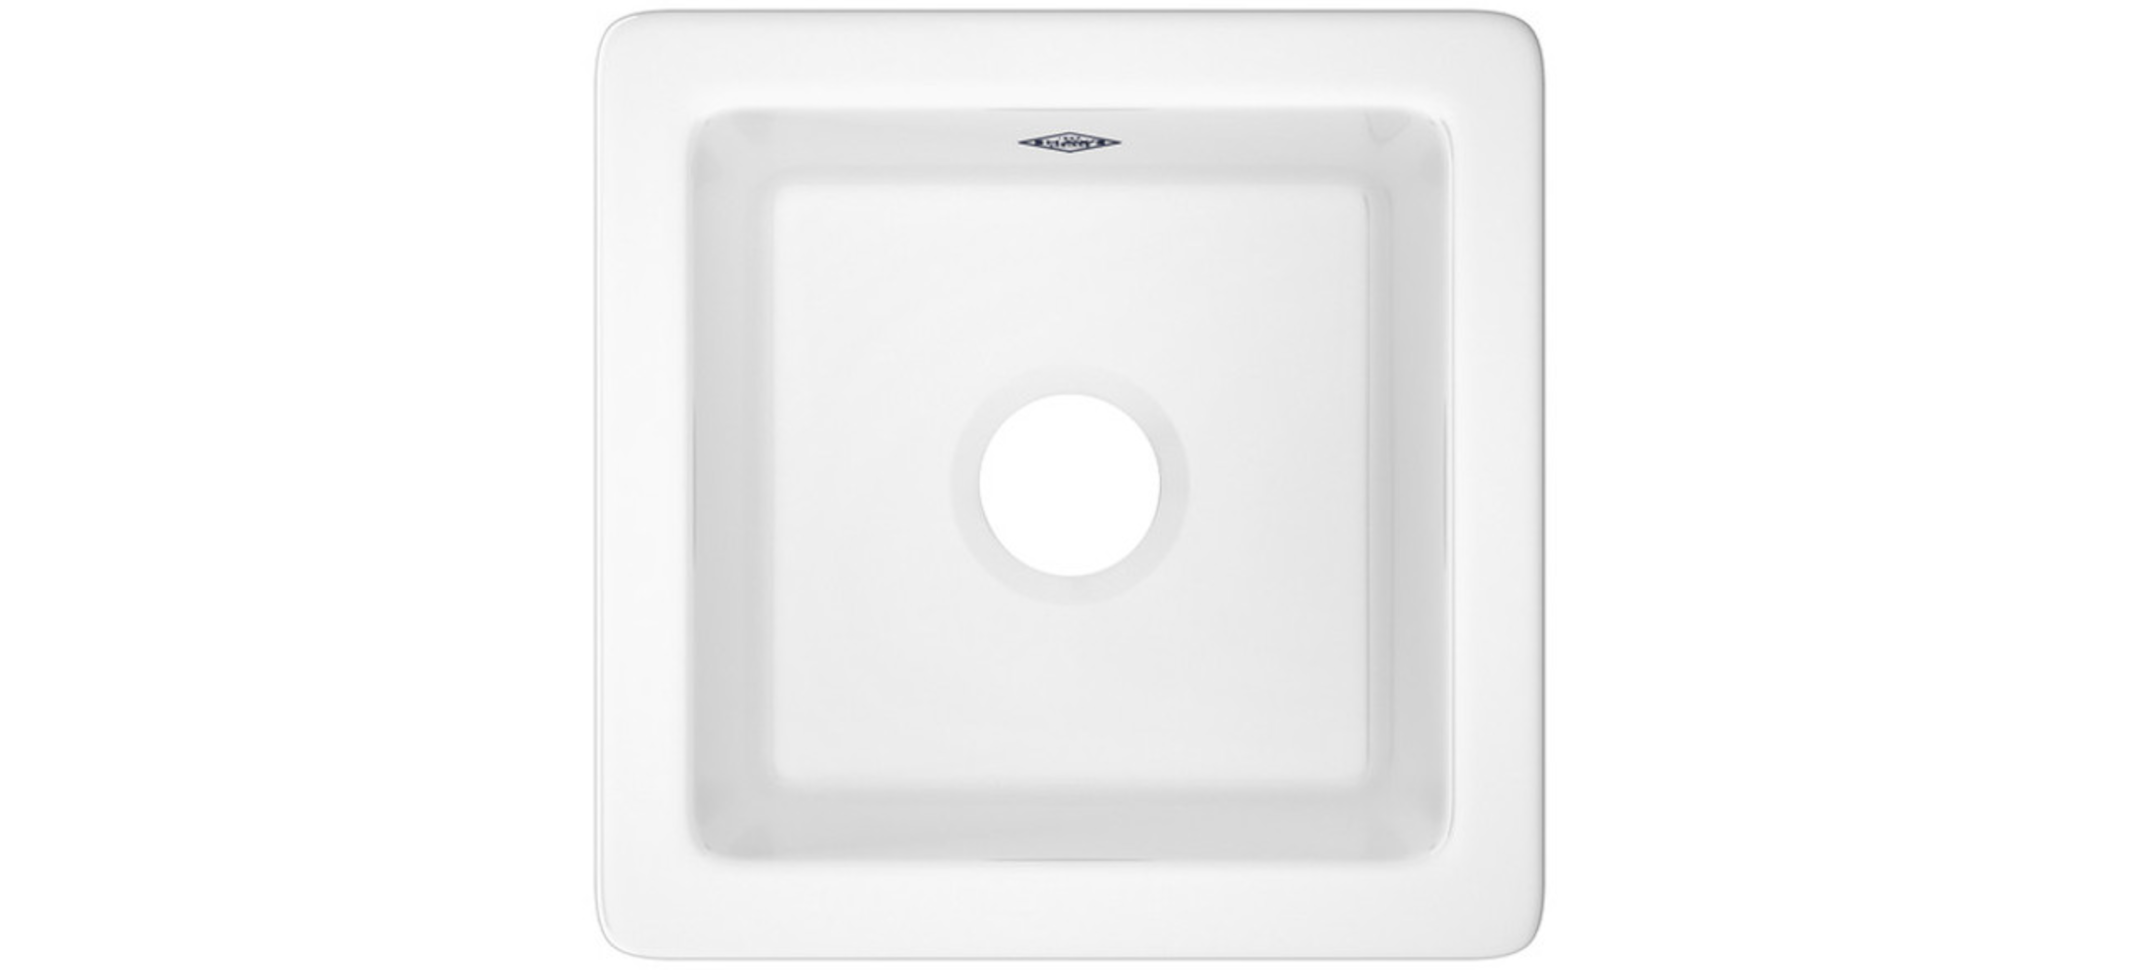 Rohl RC1515WH Shaws Original Belthorn Single Bowl Fireclay Bar/Food Prep Sink, White